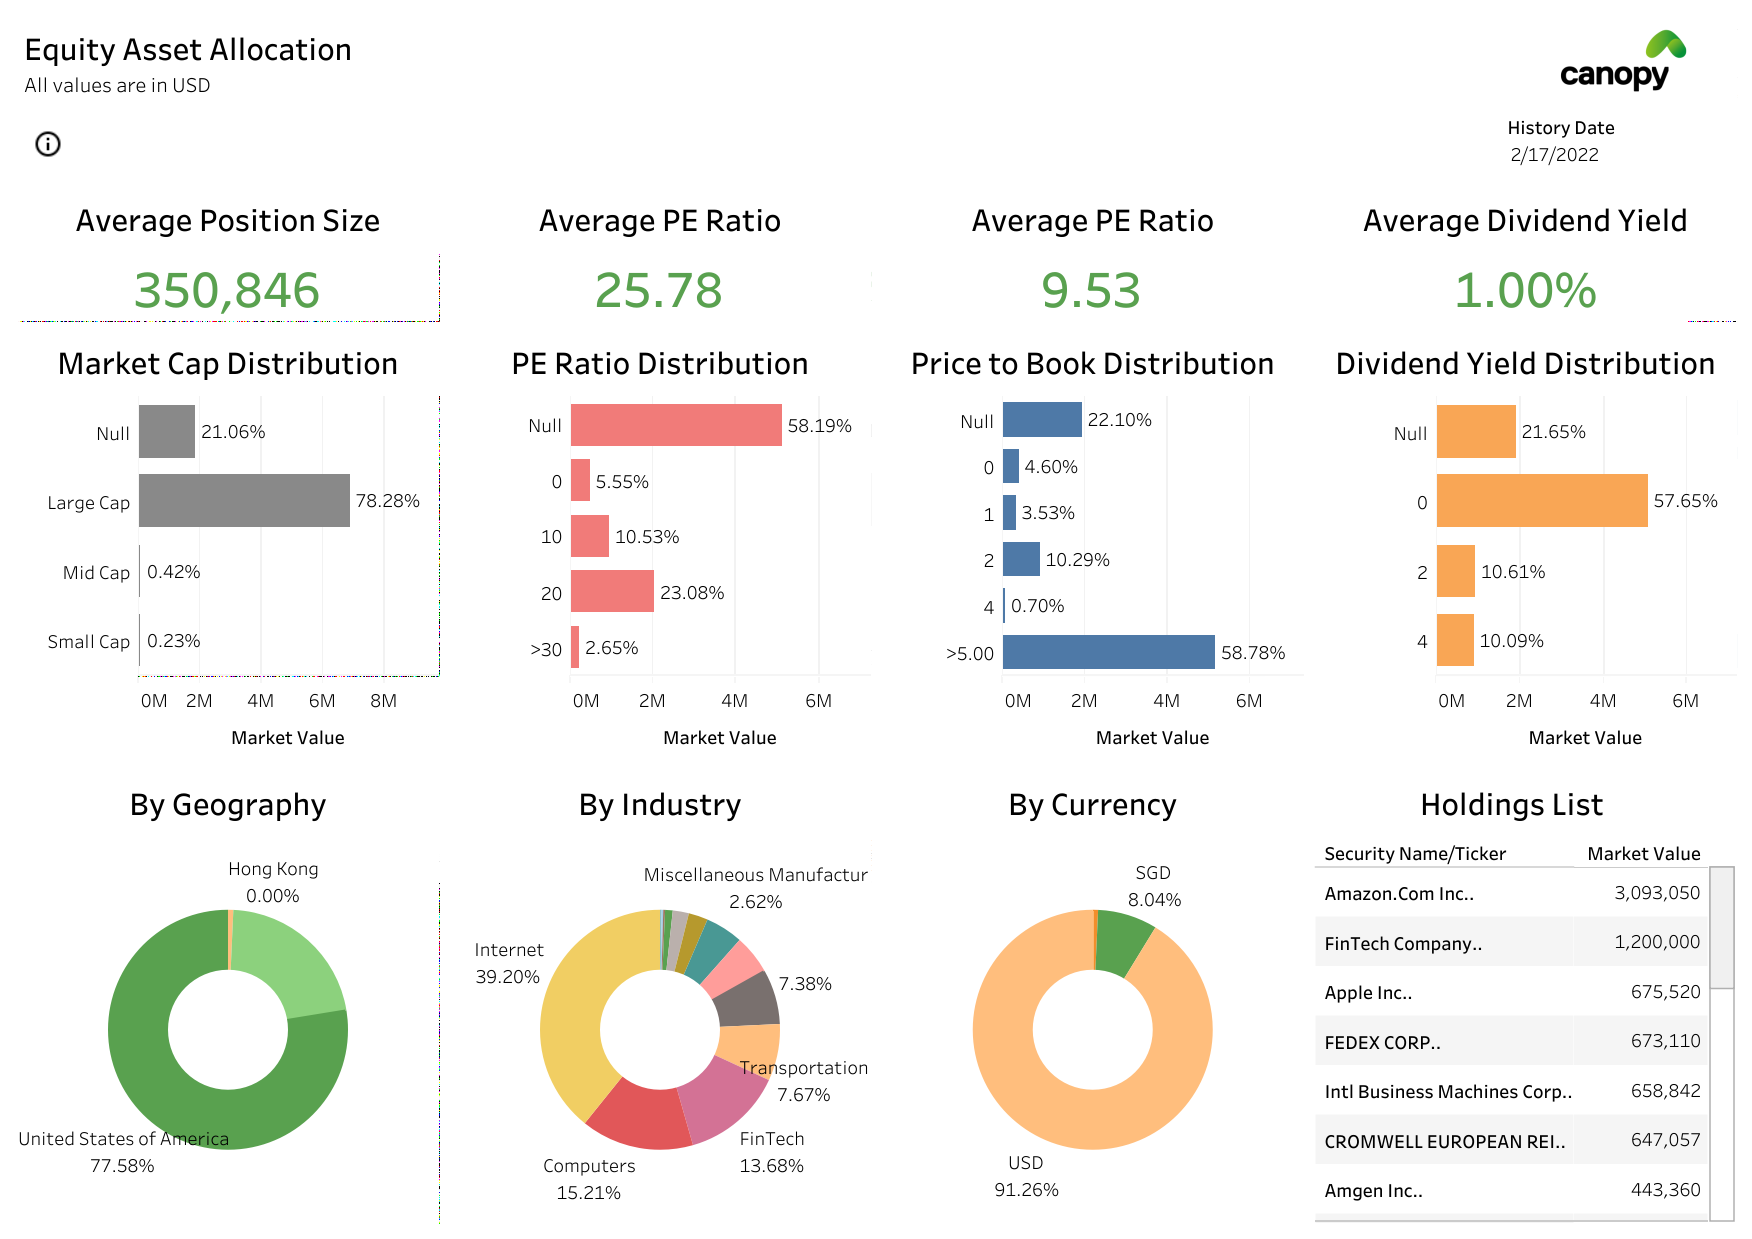 Equity Asset Allocation Dashboard